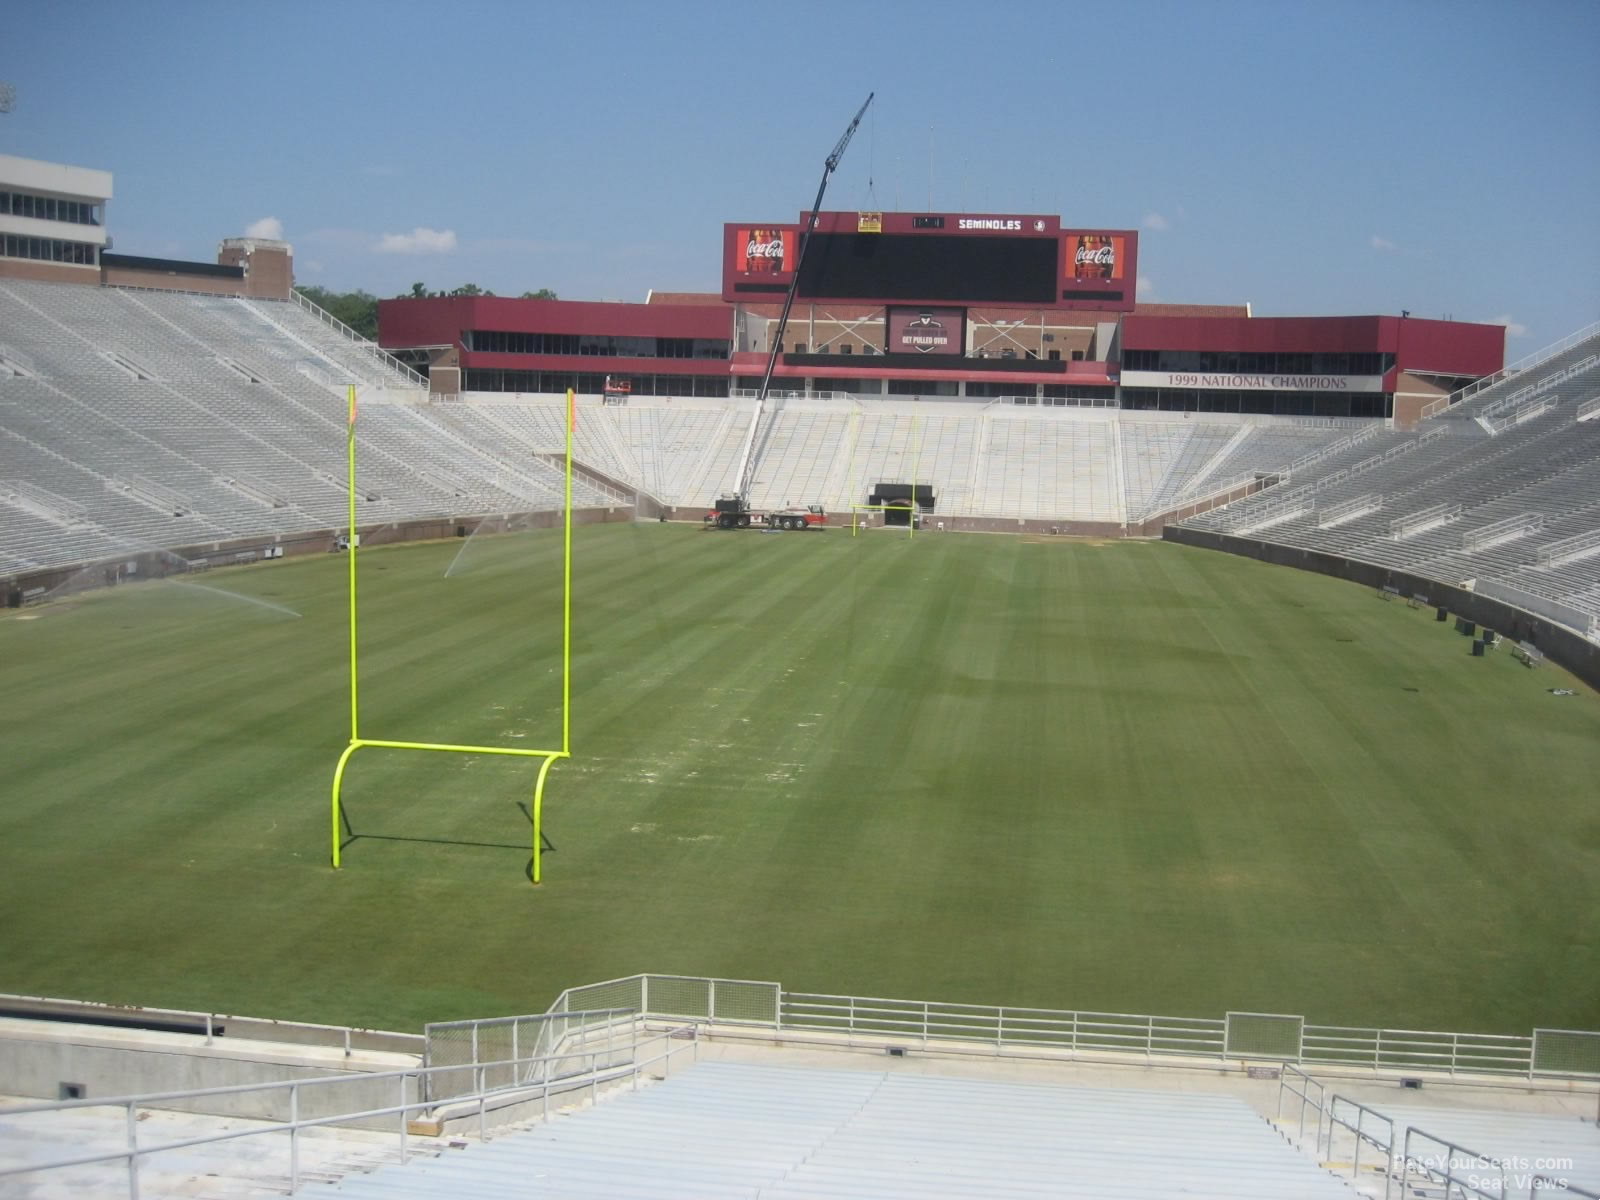 section 119, row 40 seat view  - doak campbell stadium